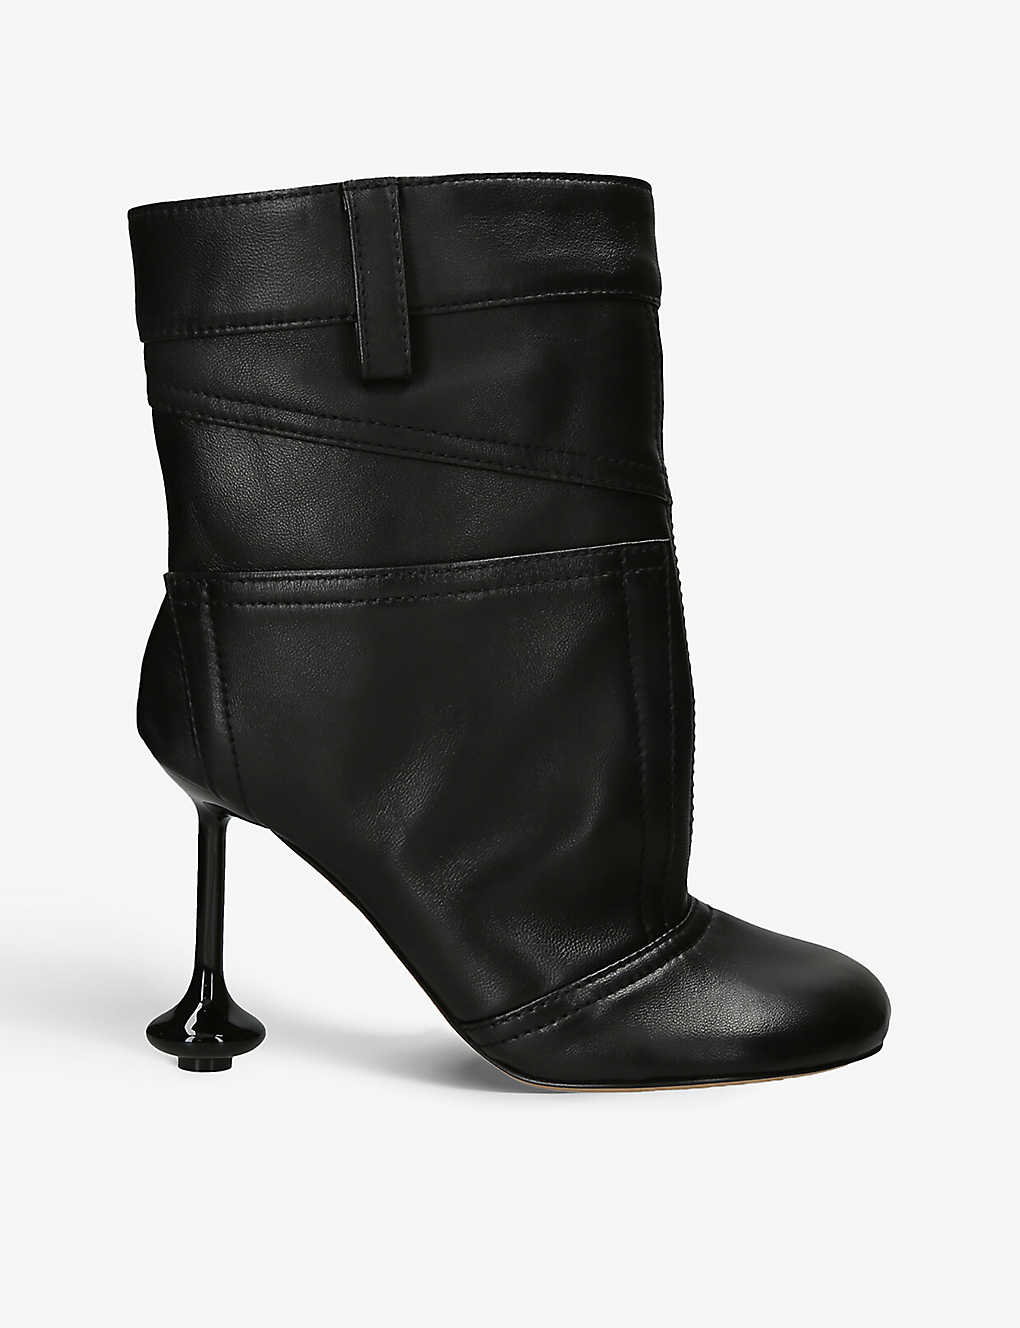 Shop Loewe Women's Black Toy Trouser-design Leather Heeled Boots